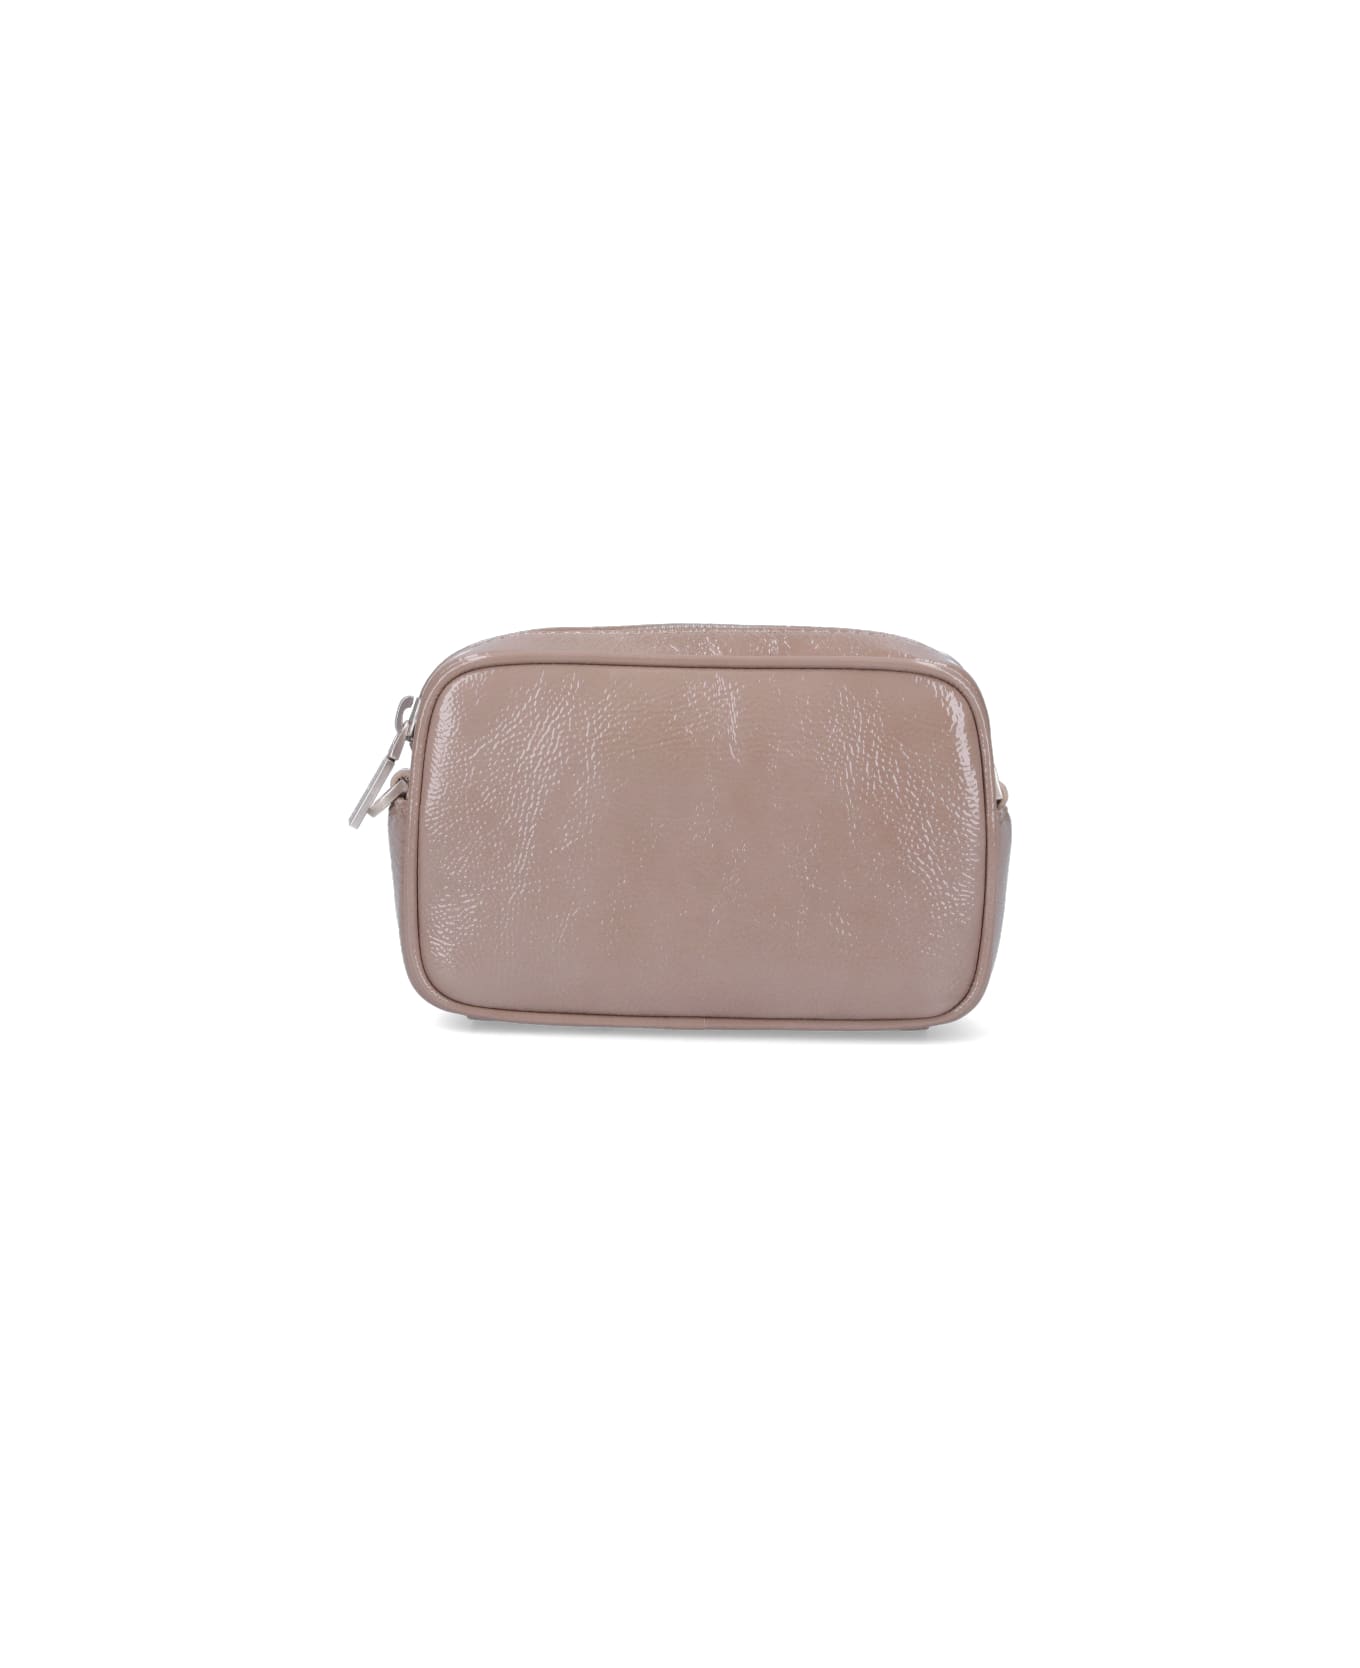 Golden Goose Star Crossbody Bag In Dove-gray Leather - Taupe